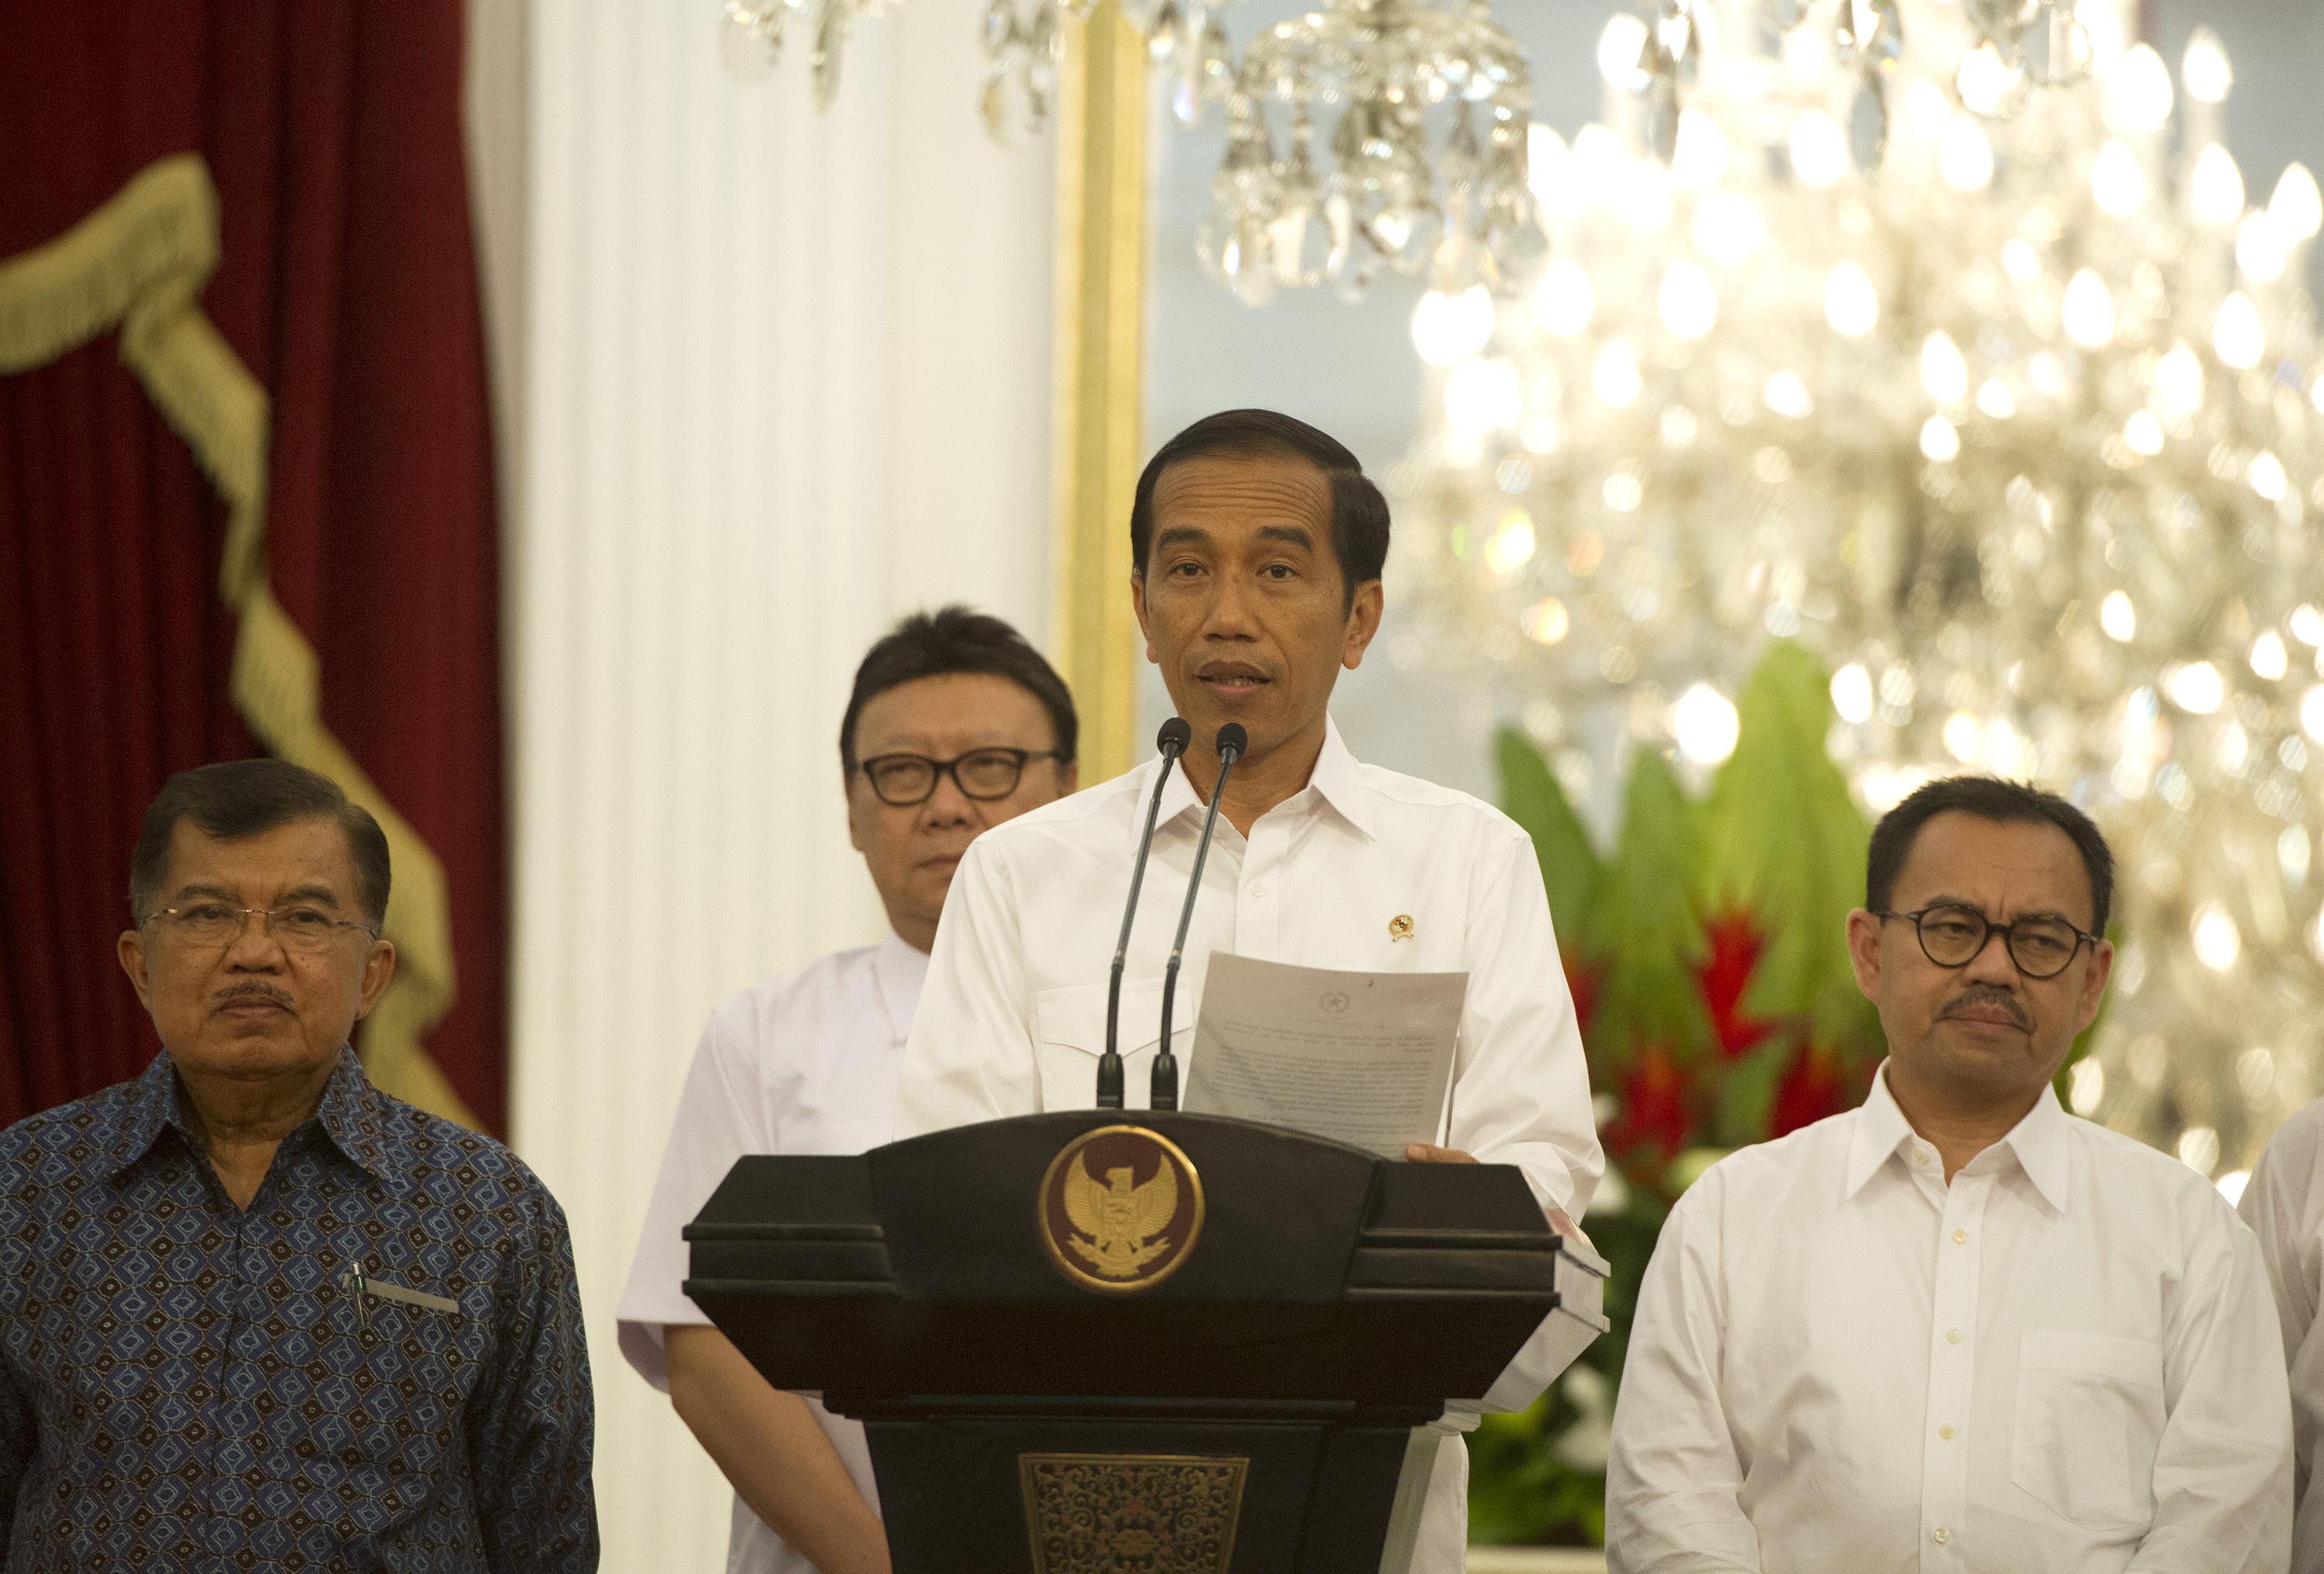 Indonesia Gets $18.7 bln In Direct Investment Since Jokowi Took Office